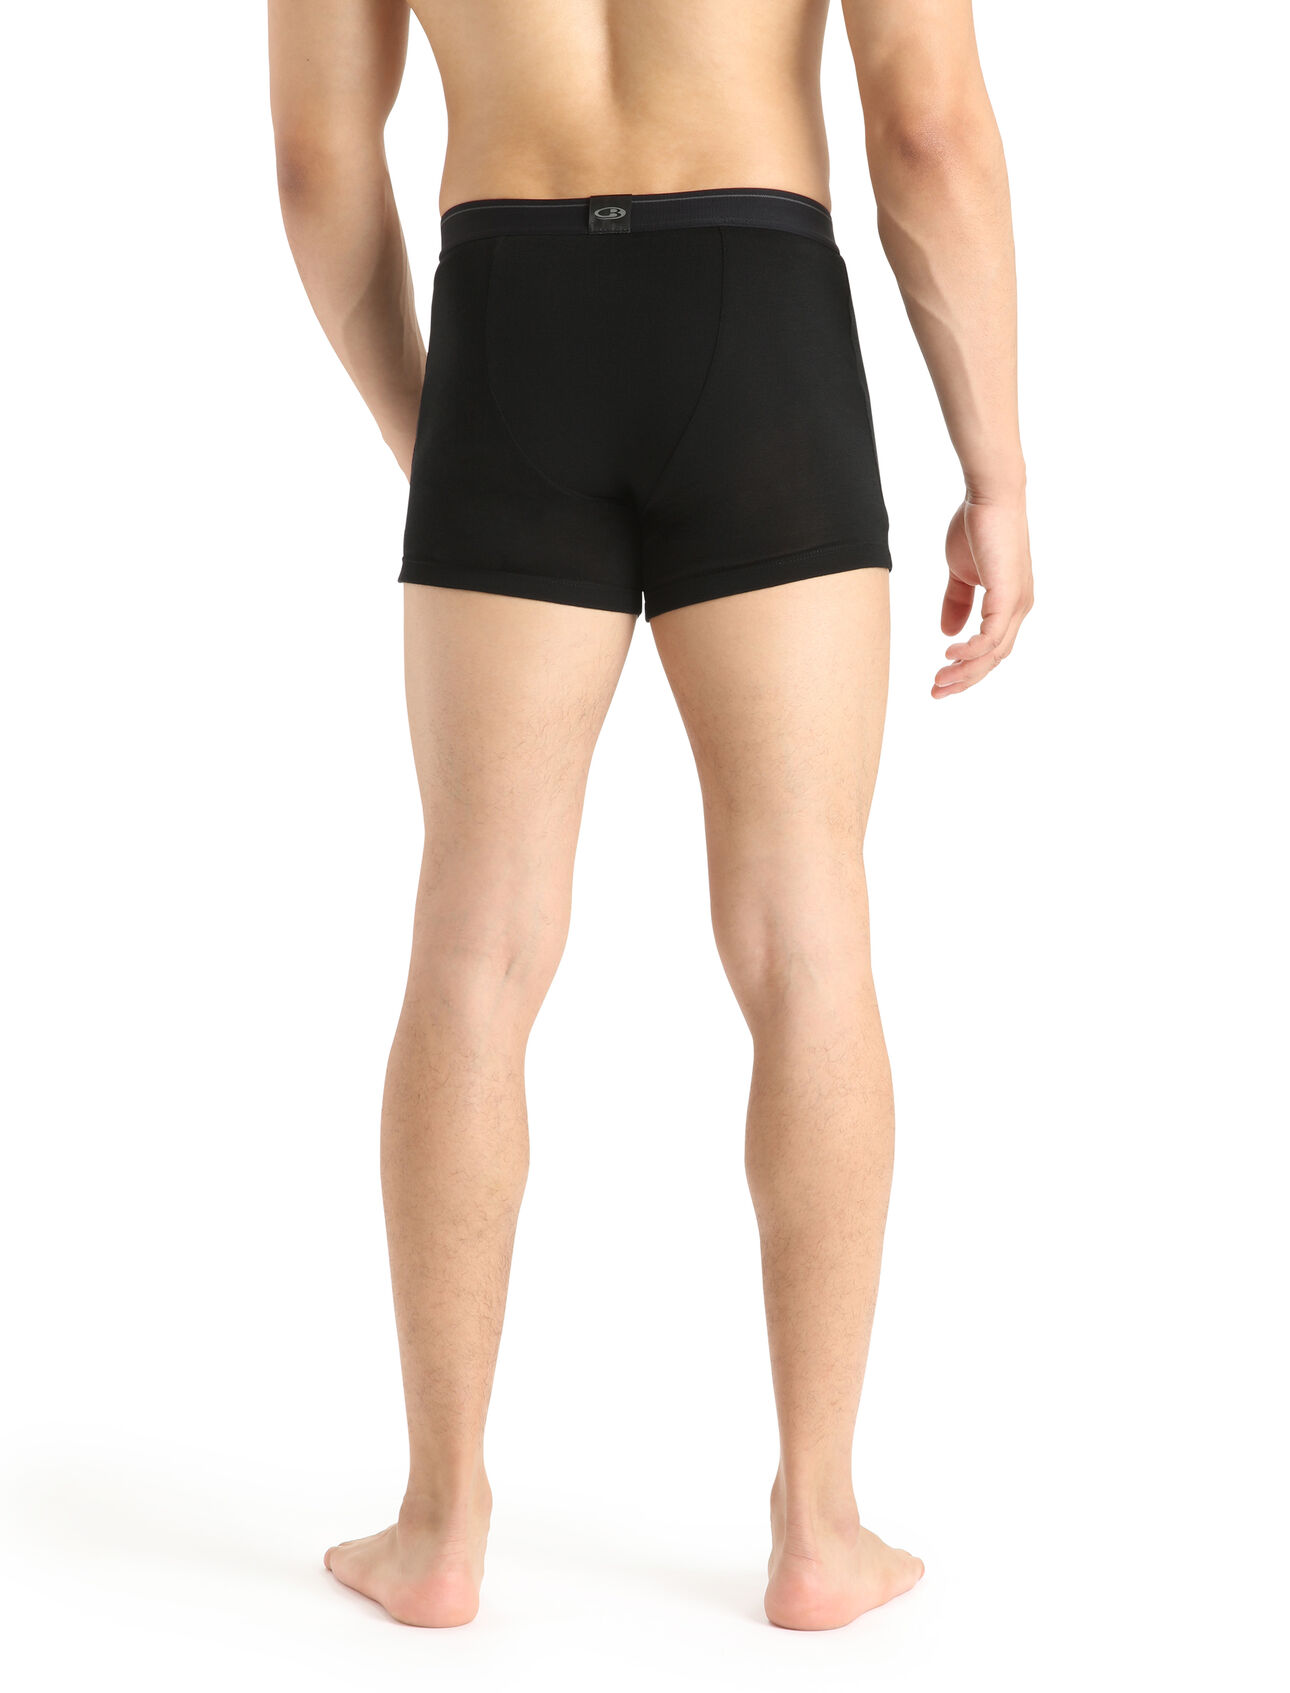 Merino 175 Everyday Thermal Boxers With Fly